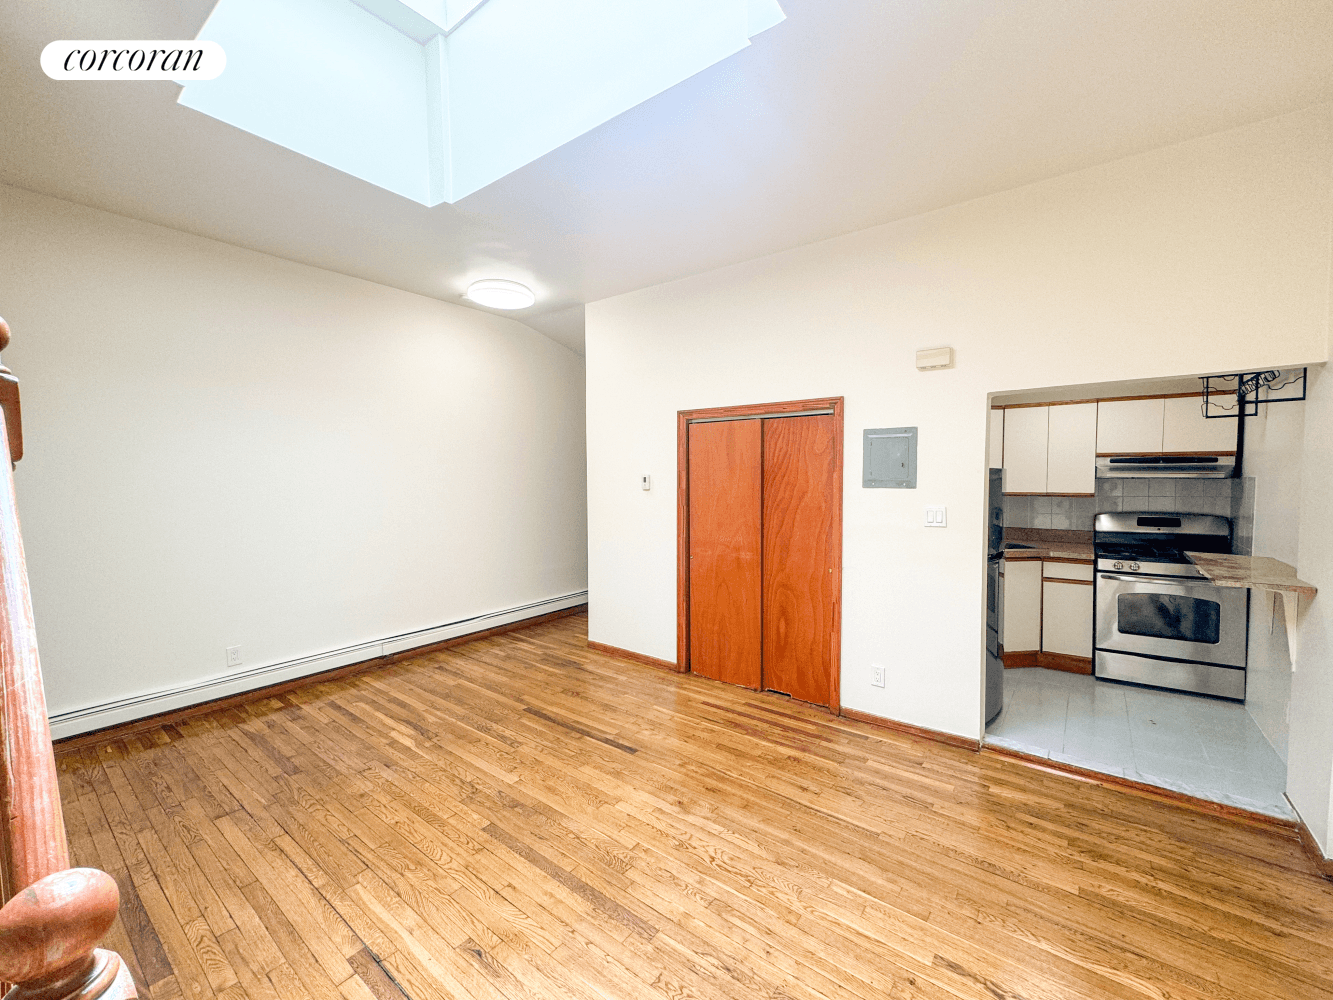 A spacious and bright 3 bedroom, 2 bathroom rental in the heart of Clinton Hill, Brooklyn.